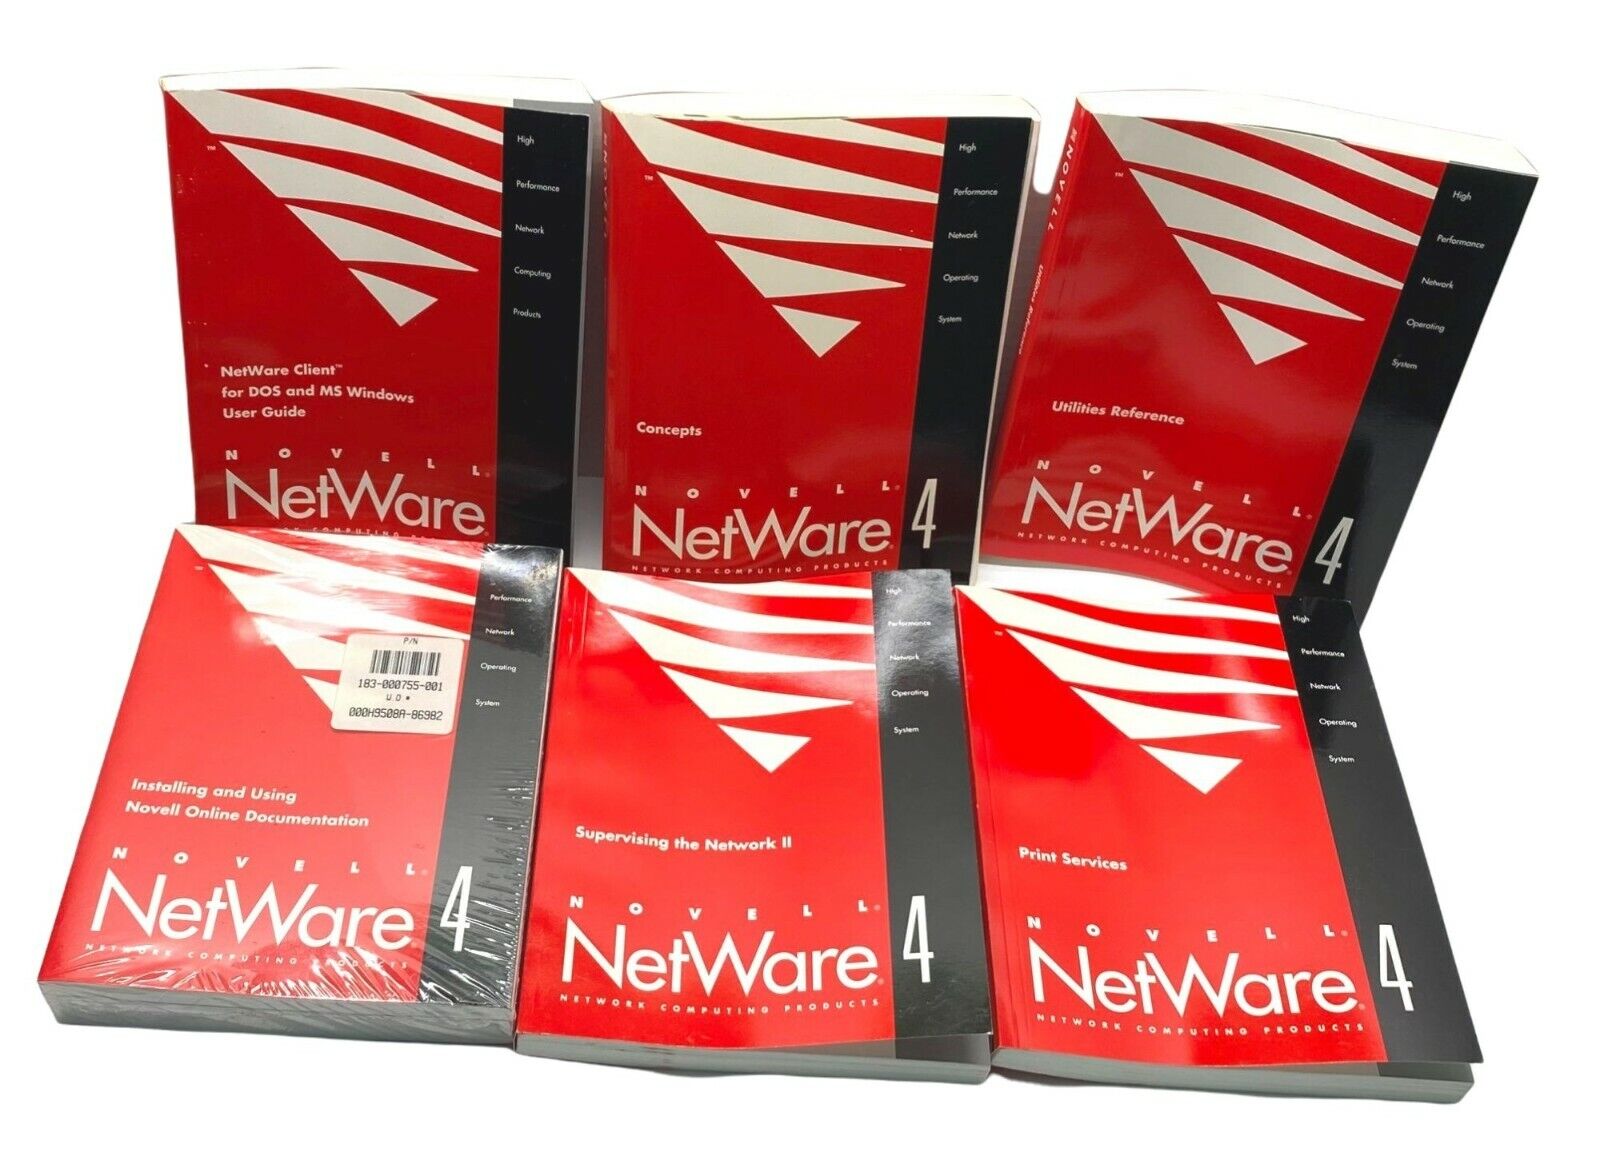 Novell Netware 4 Networking Reference Books Concepts Utilities...